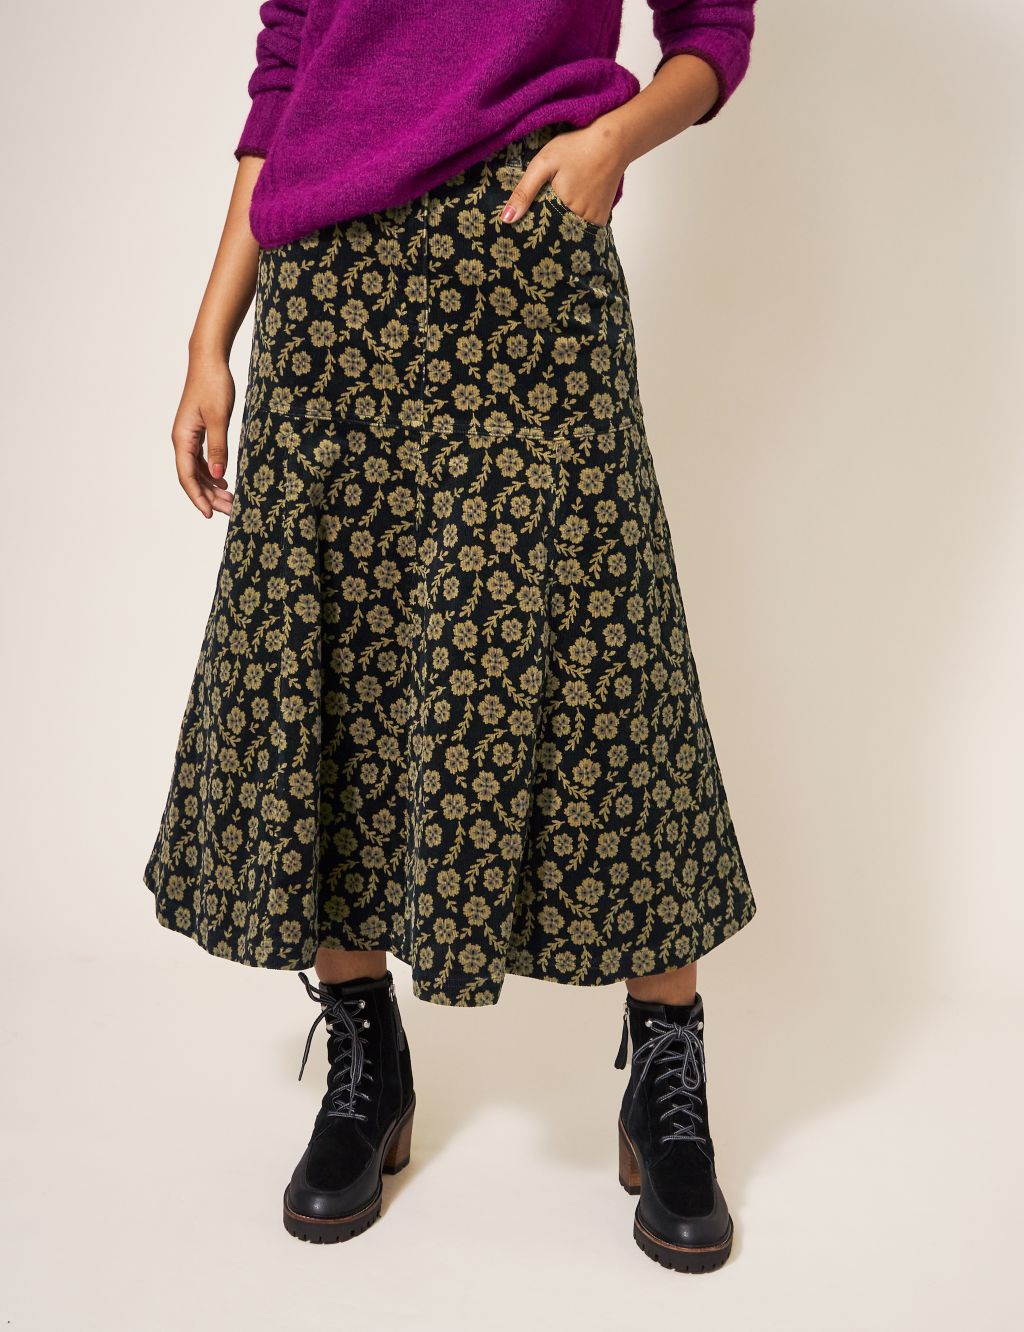 Cord Floral Midaxi A-Line Skirt image 3